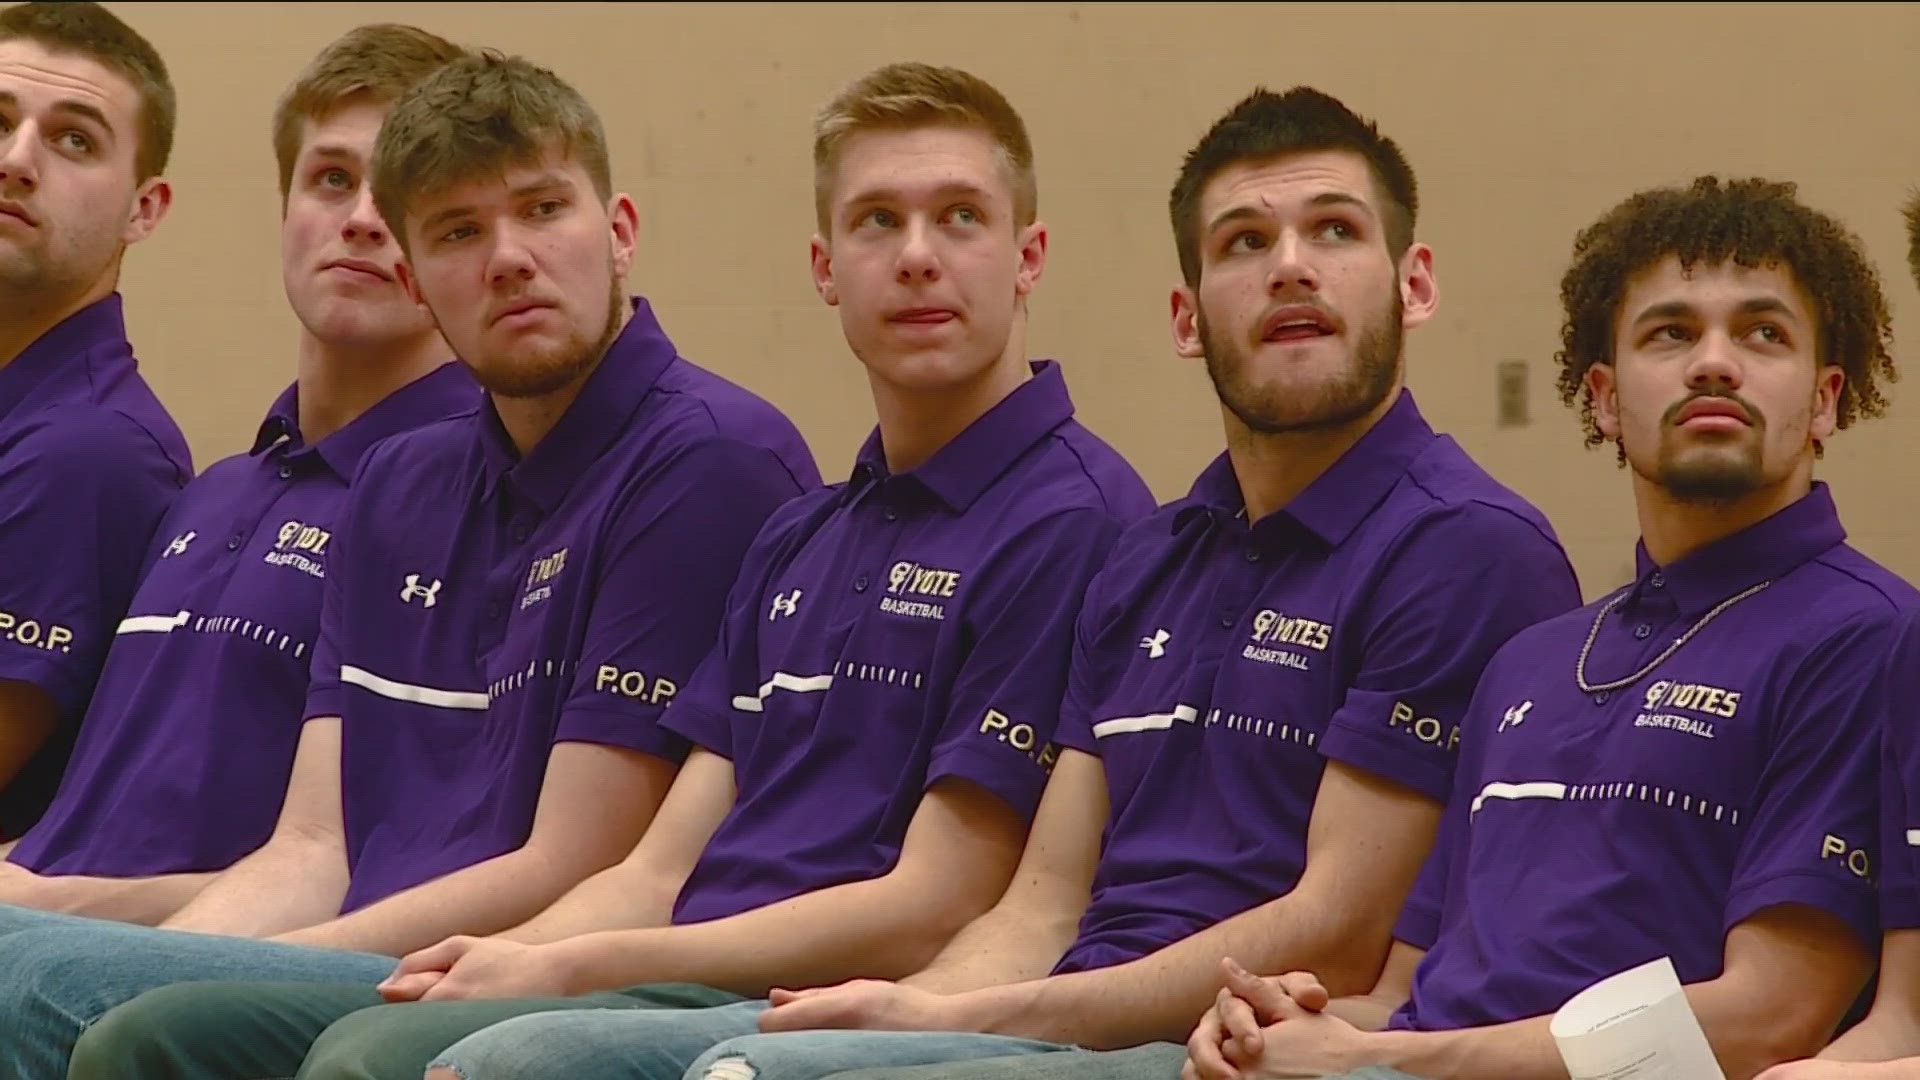 The 'Yote Fam' was out in full force Wednesday night at the J.A. Albertson Activities Center as the College of Idaho celebrated this year's unforgettable title run.